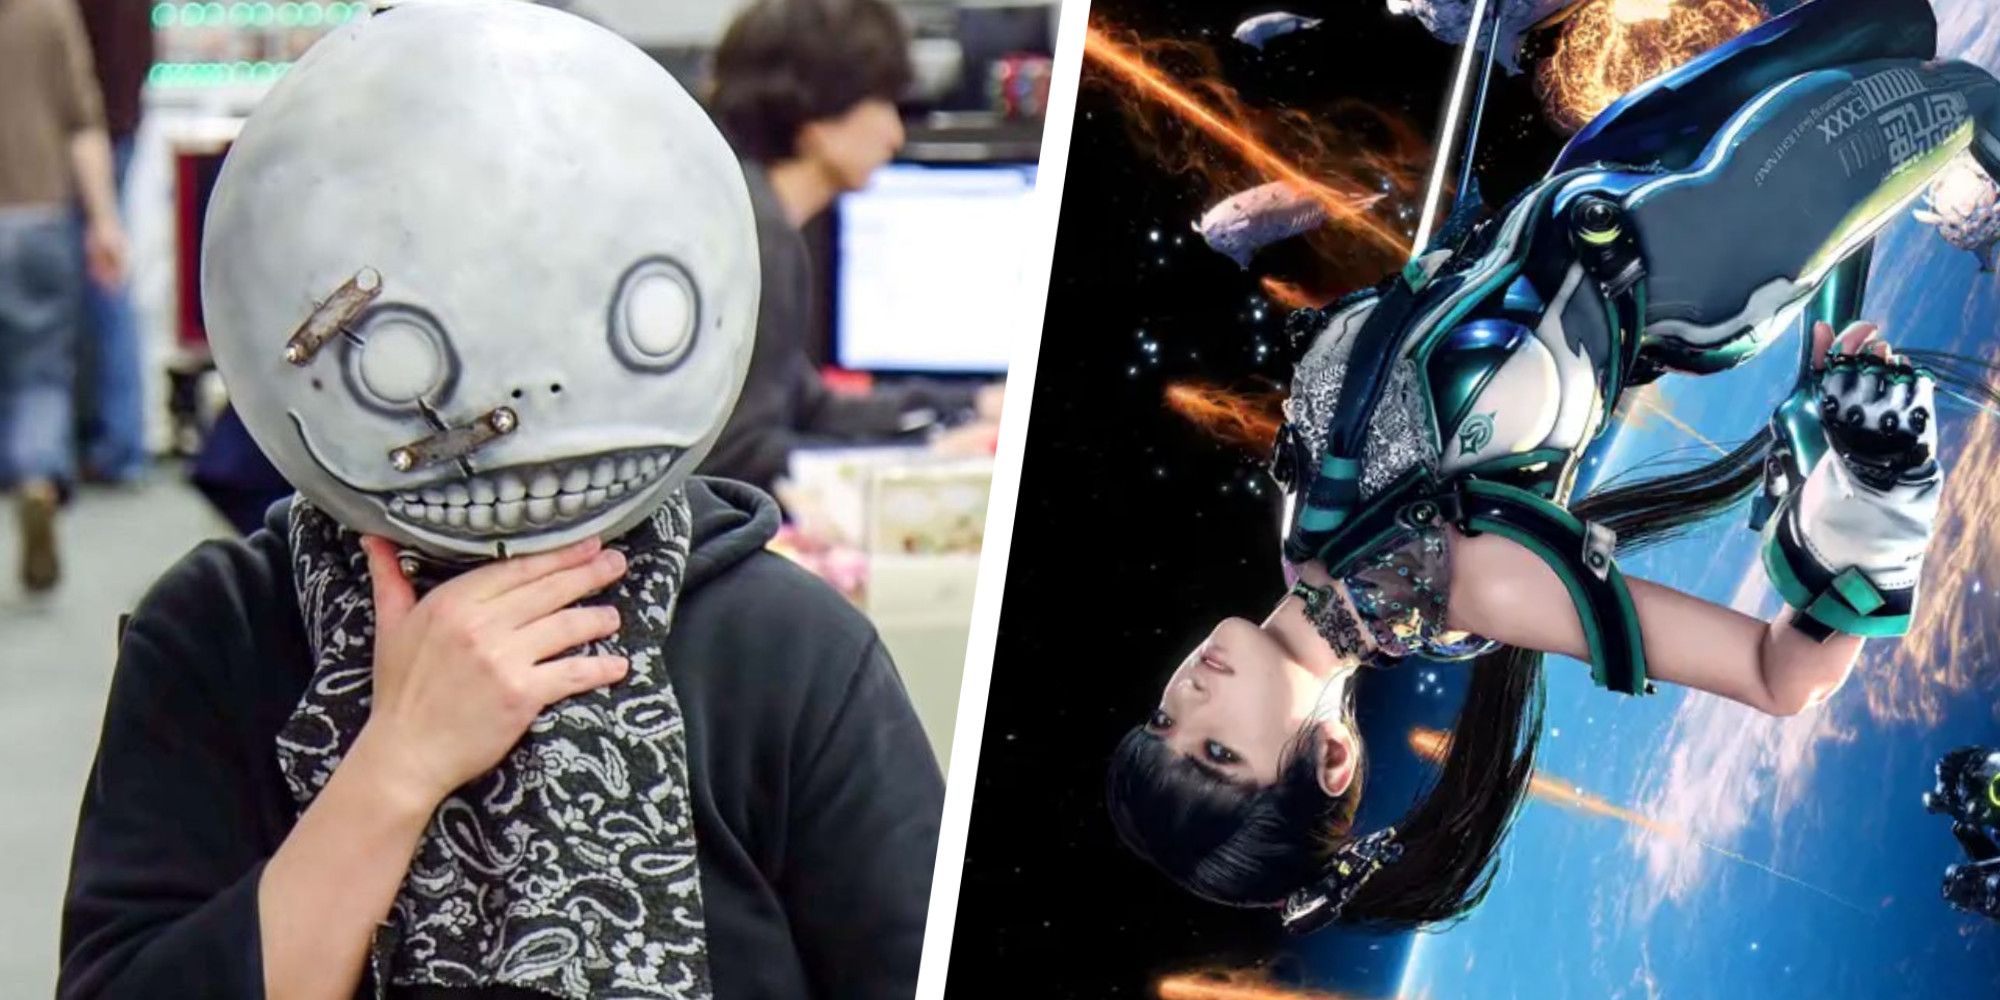 Yoko Taro on the left and Stellar Blade protagonist Eve floating through space on the right